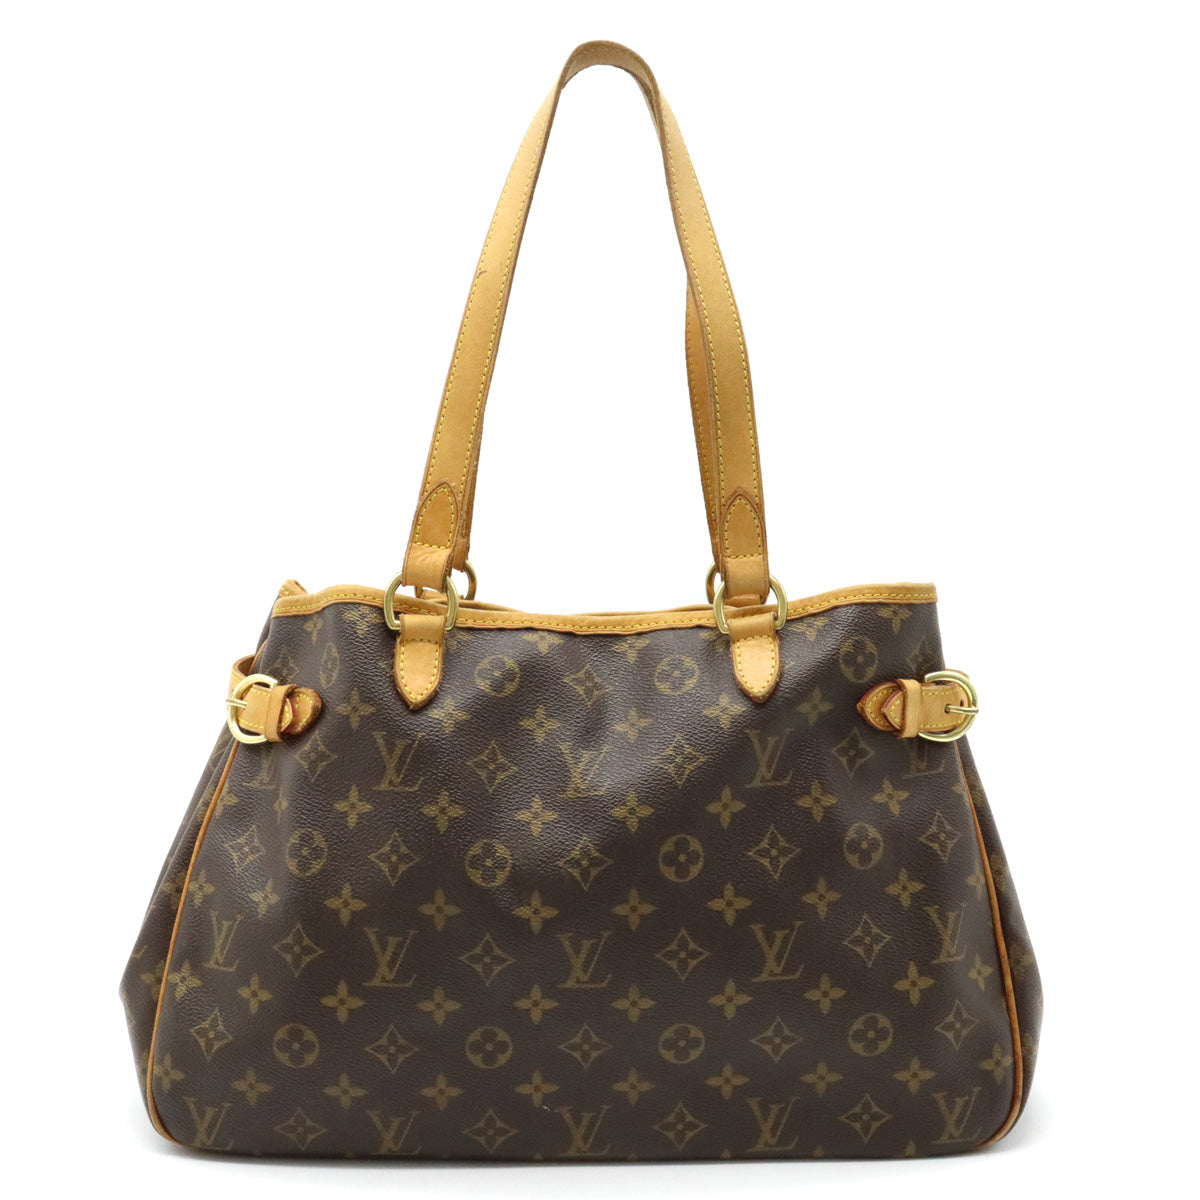 Fashion Look Featuring Louis Vuitton Bags and Louis Vuitton